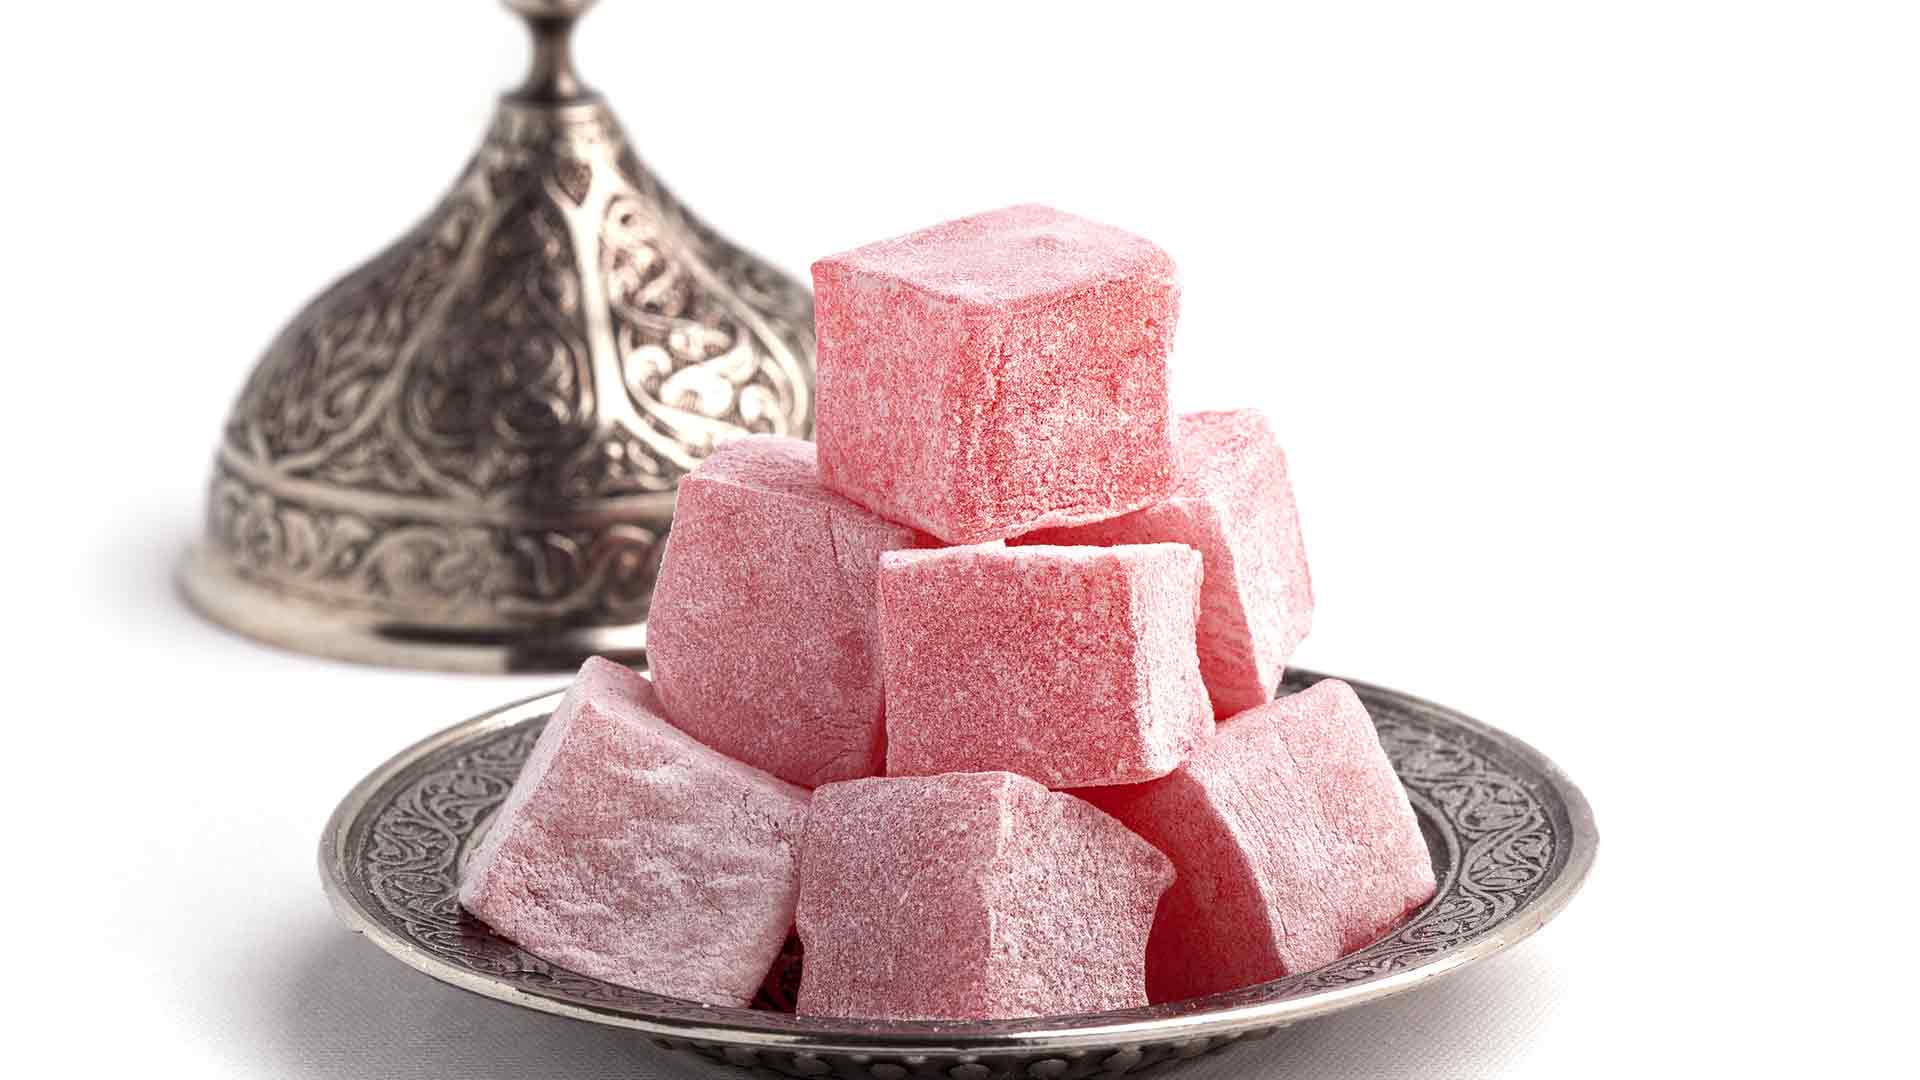 Turkish Delight Ive Always Loved It But It Is Definitely A Acquired